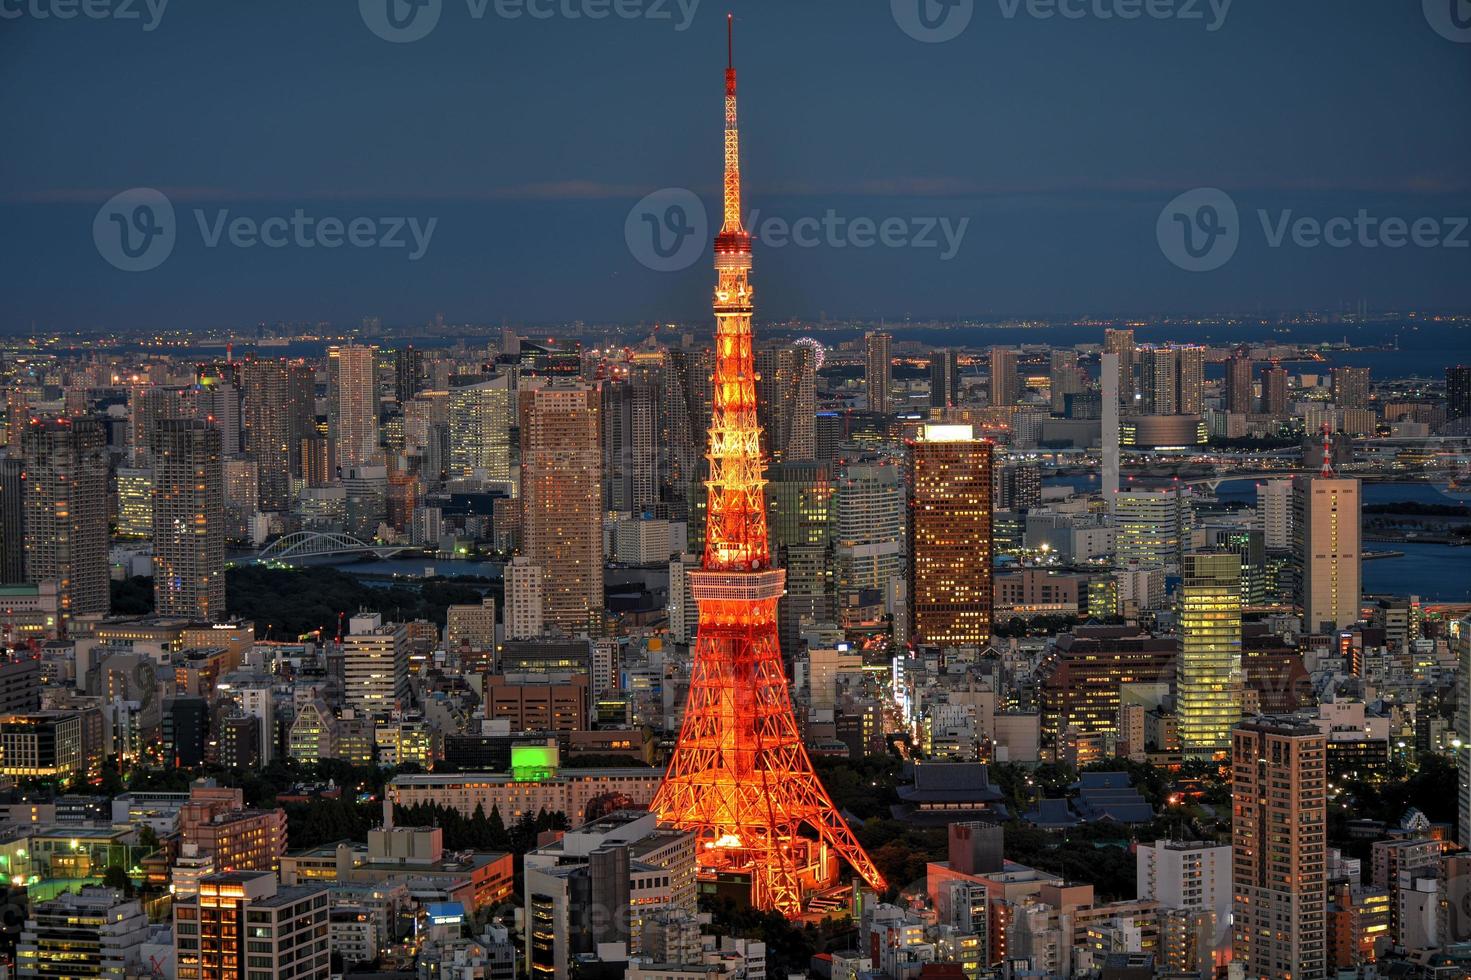 Tokyo area dense building nightscape and Tokyo tower photo